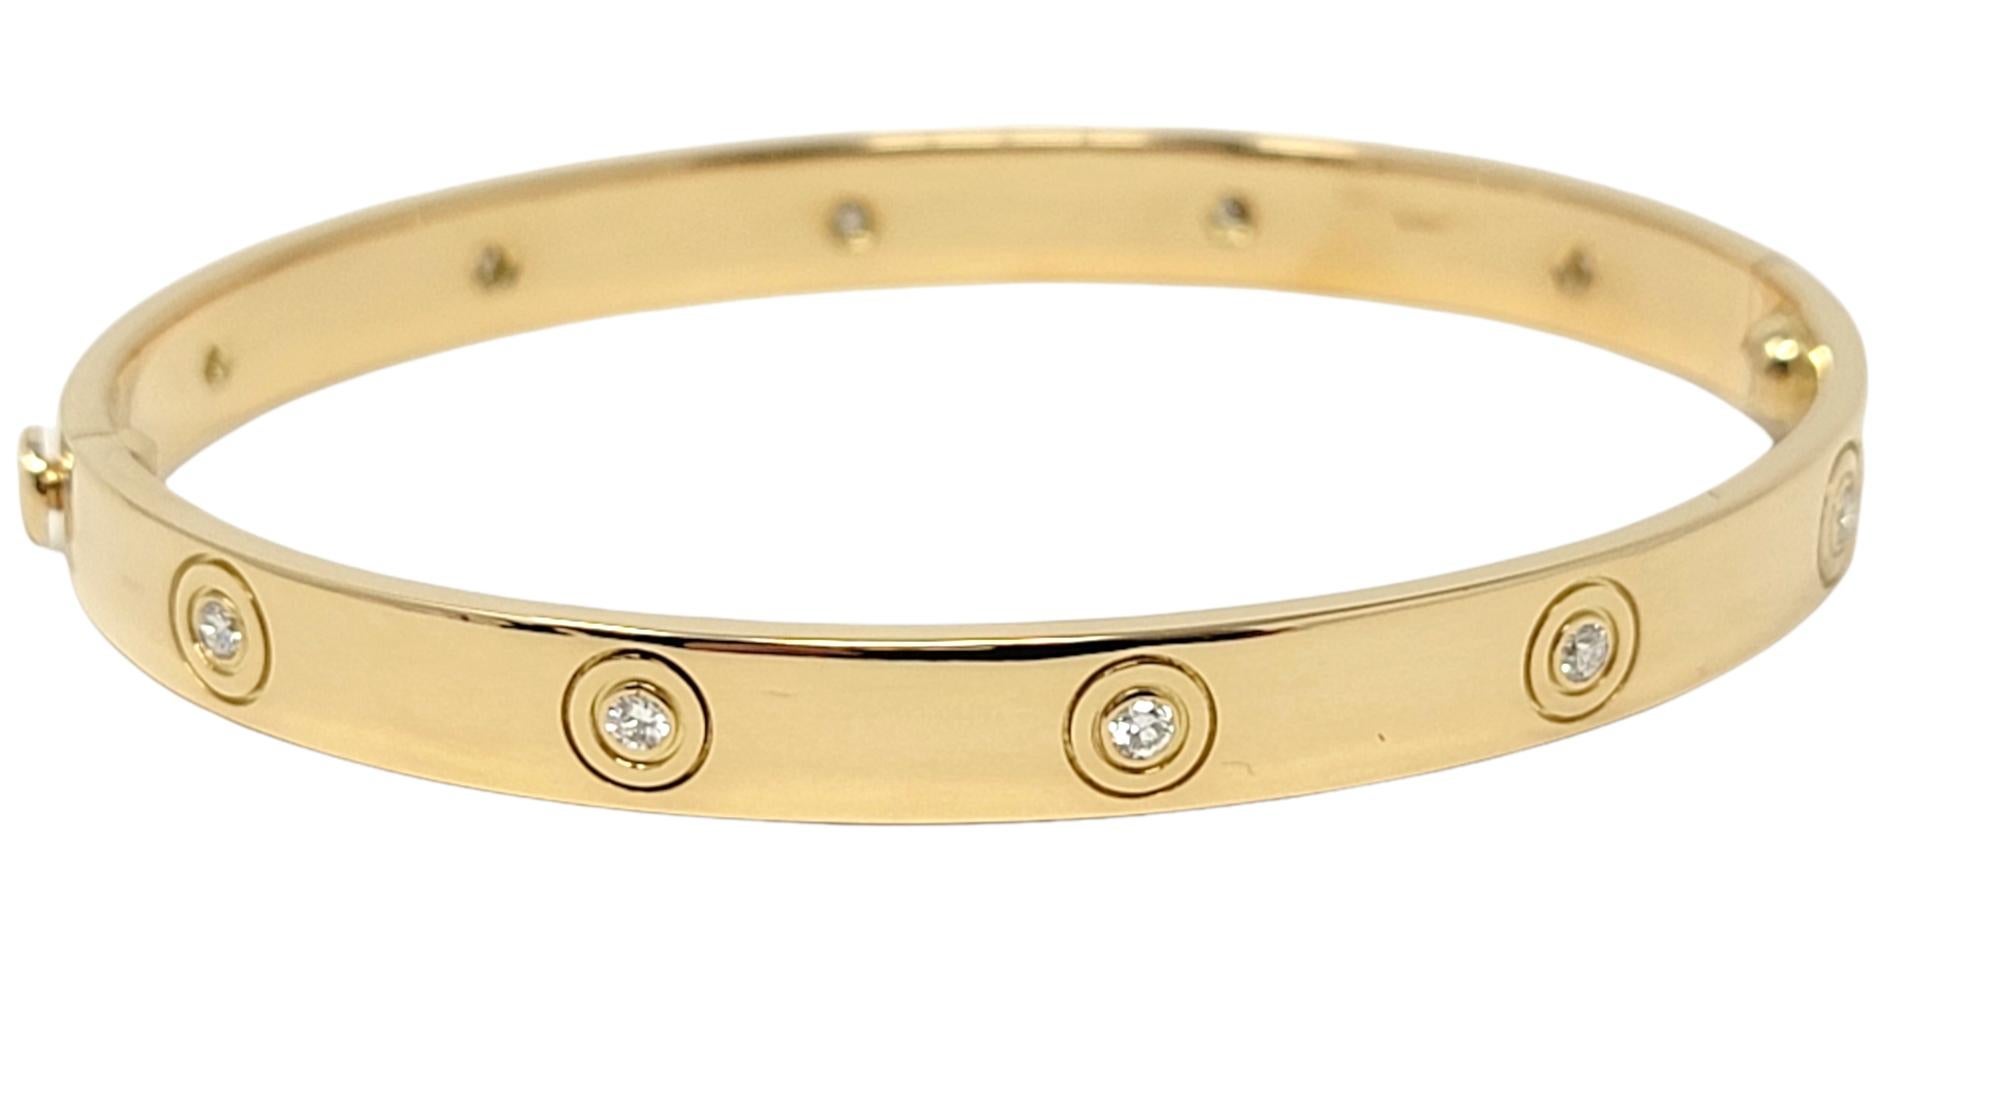 Vintage Iconic Love Collection bangle bracelet with diamonds from luxury jeweler, Cartier. This simple, yet effortlessly timeless piece makes a chic statement on the wrist. Made of beautifully polished 18 karat yellow gold, the thin designer bangle